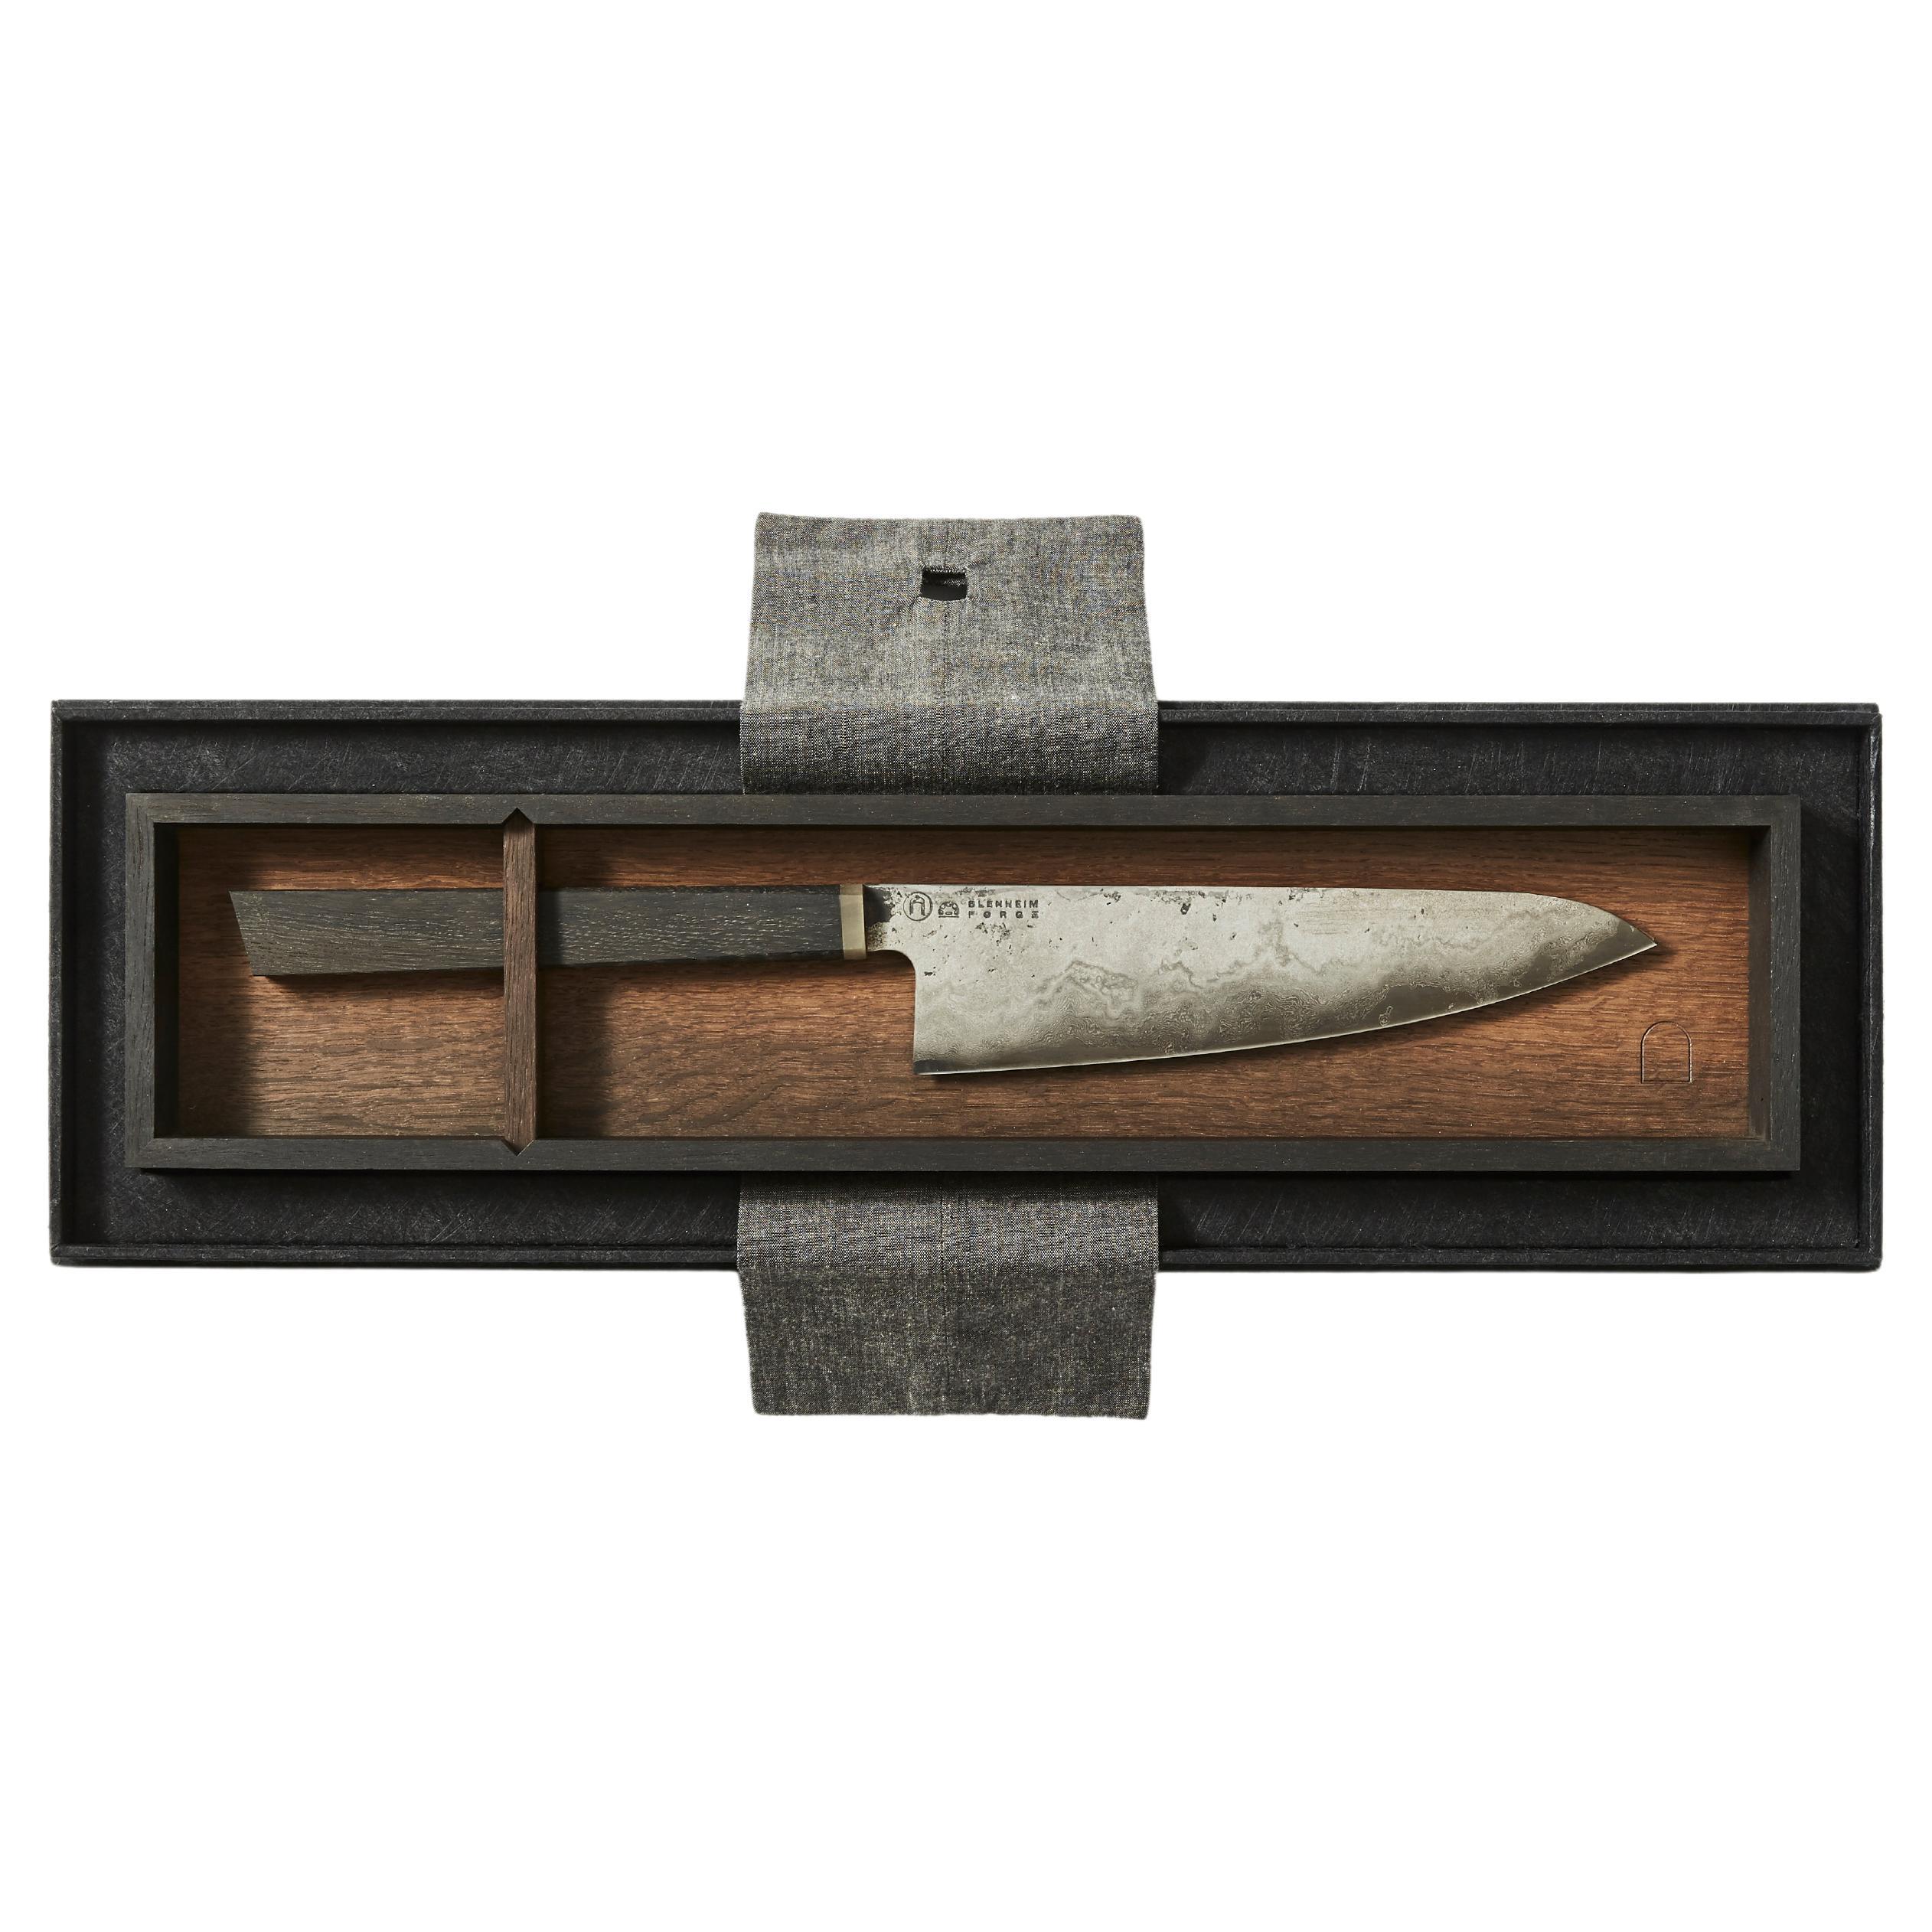 Single Damascus Knife Set with 3000-5000 Year-Old Bog-Oak Display Box For Sale